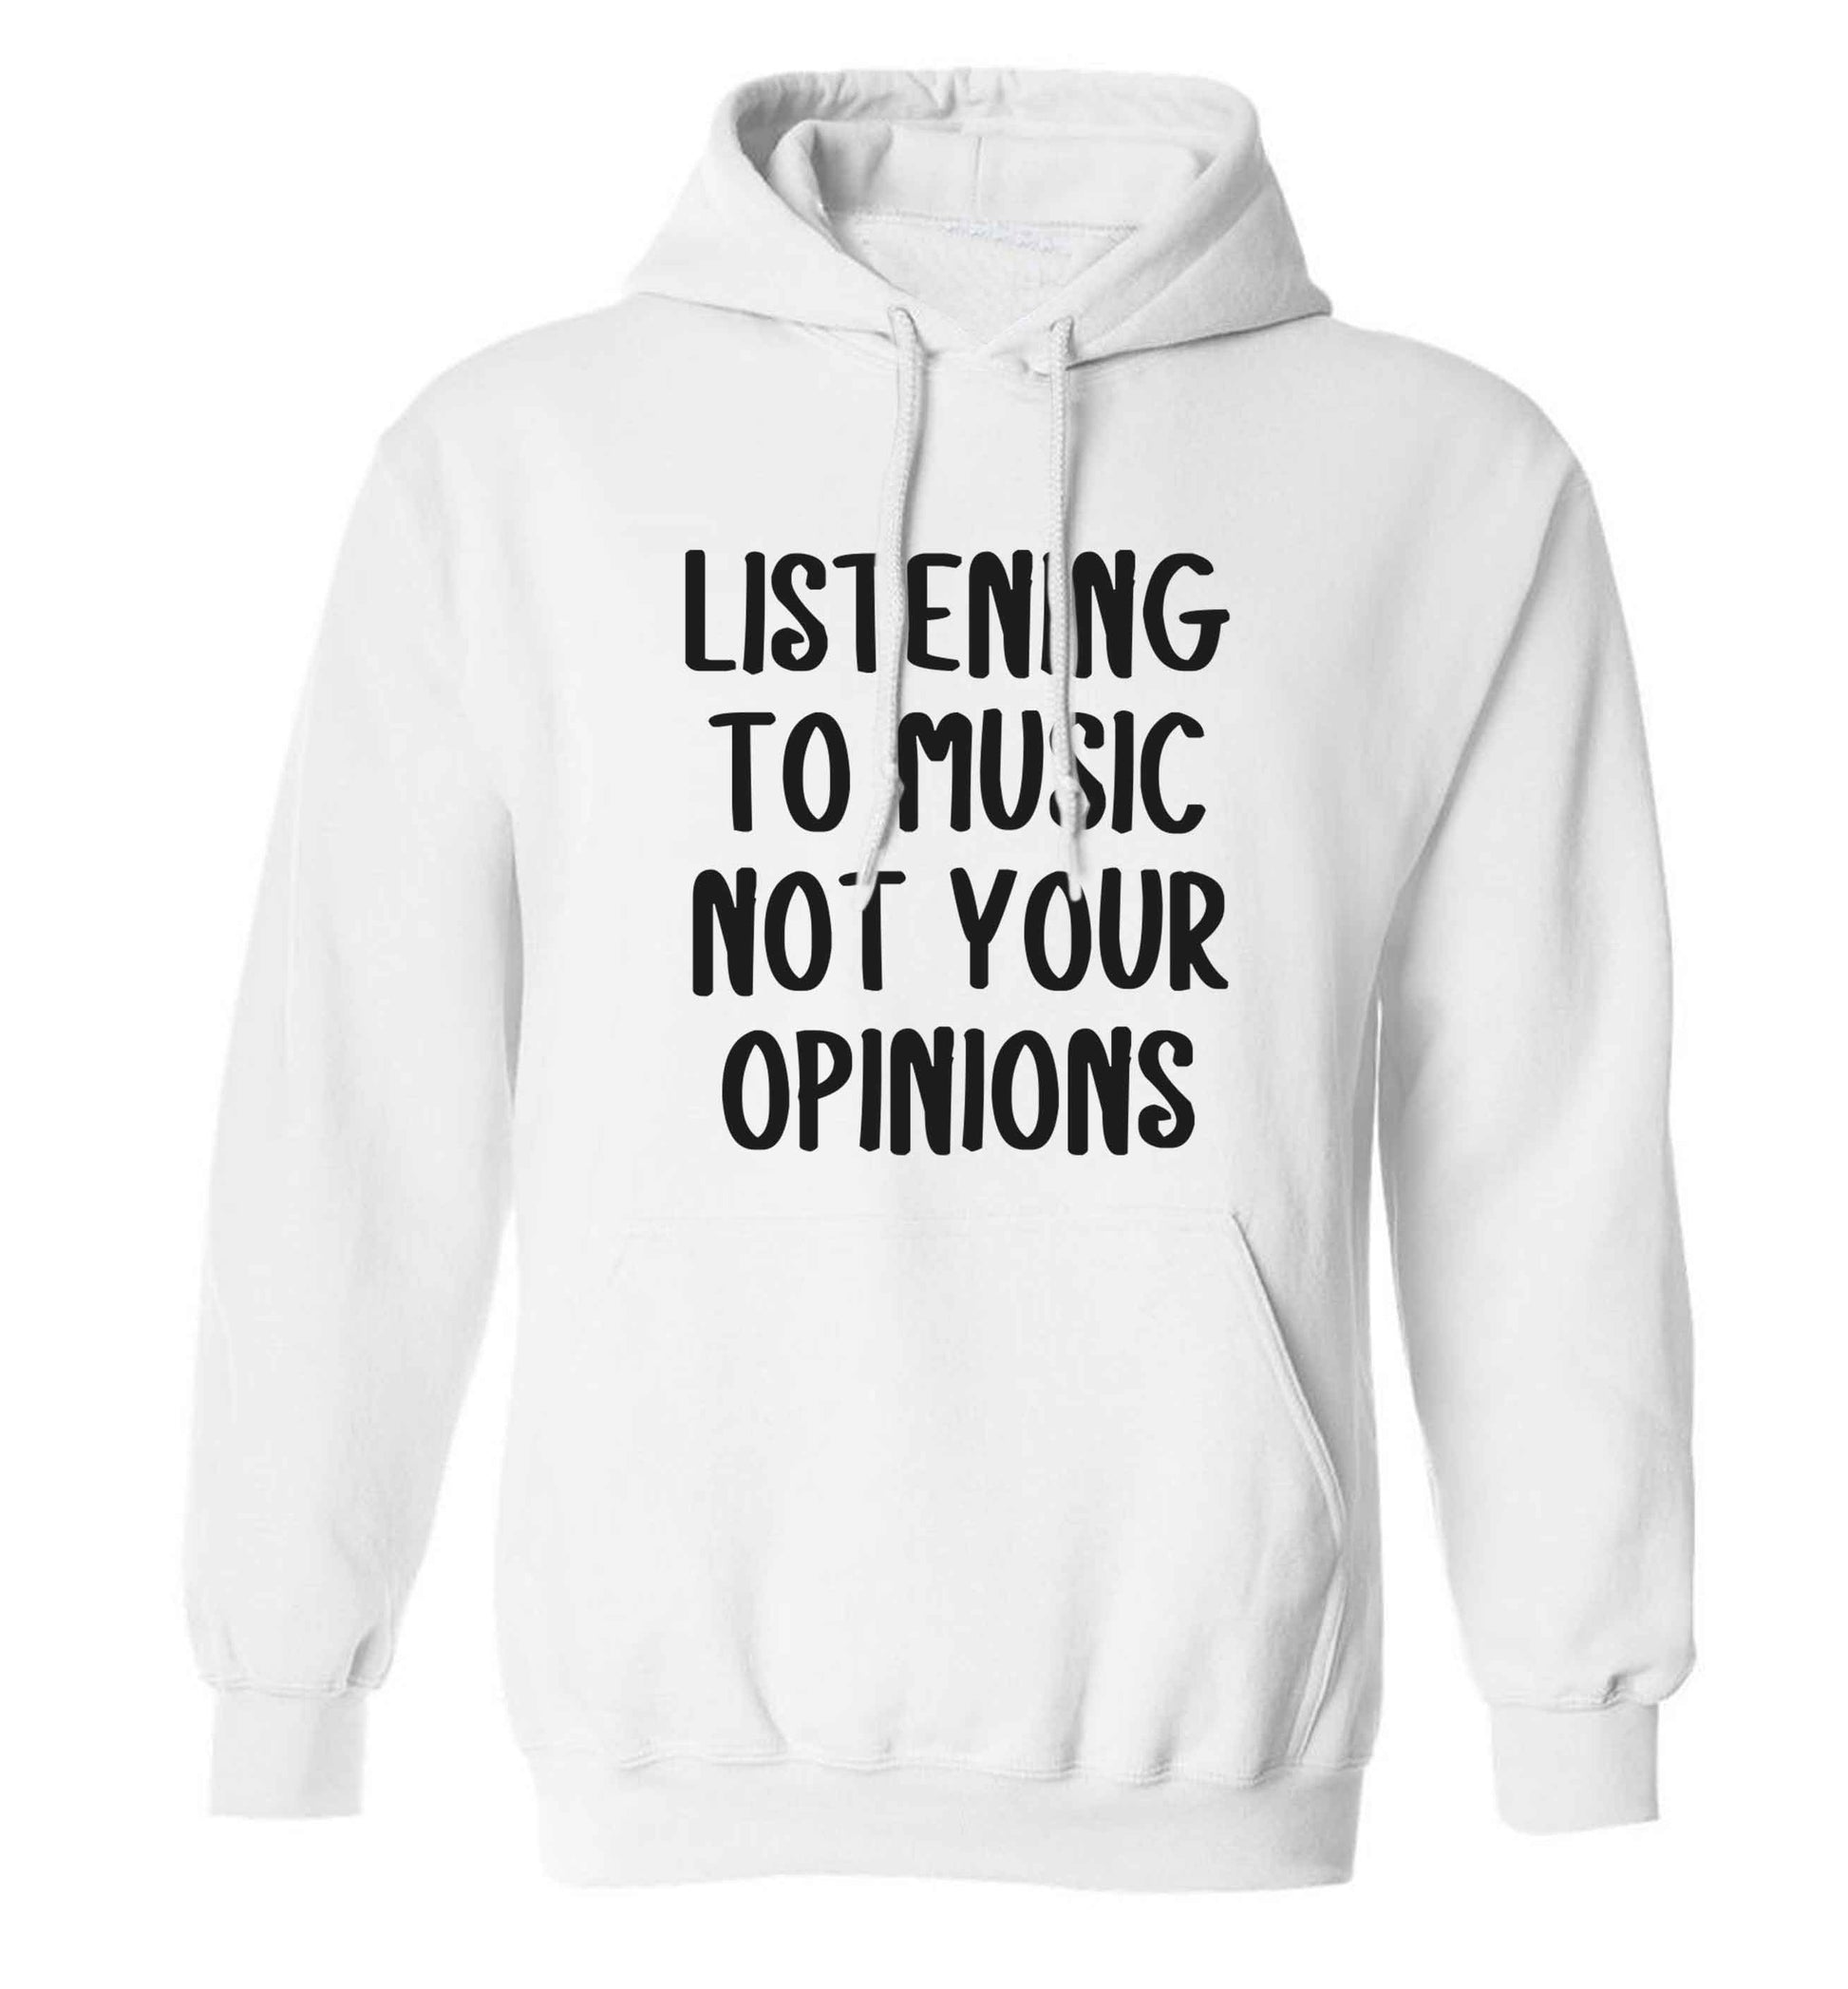 Listening to music not your opinions adults unisex white hoodie 2XL